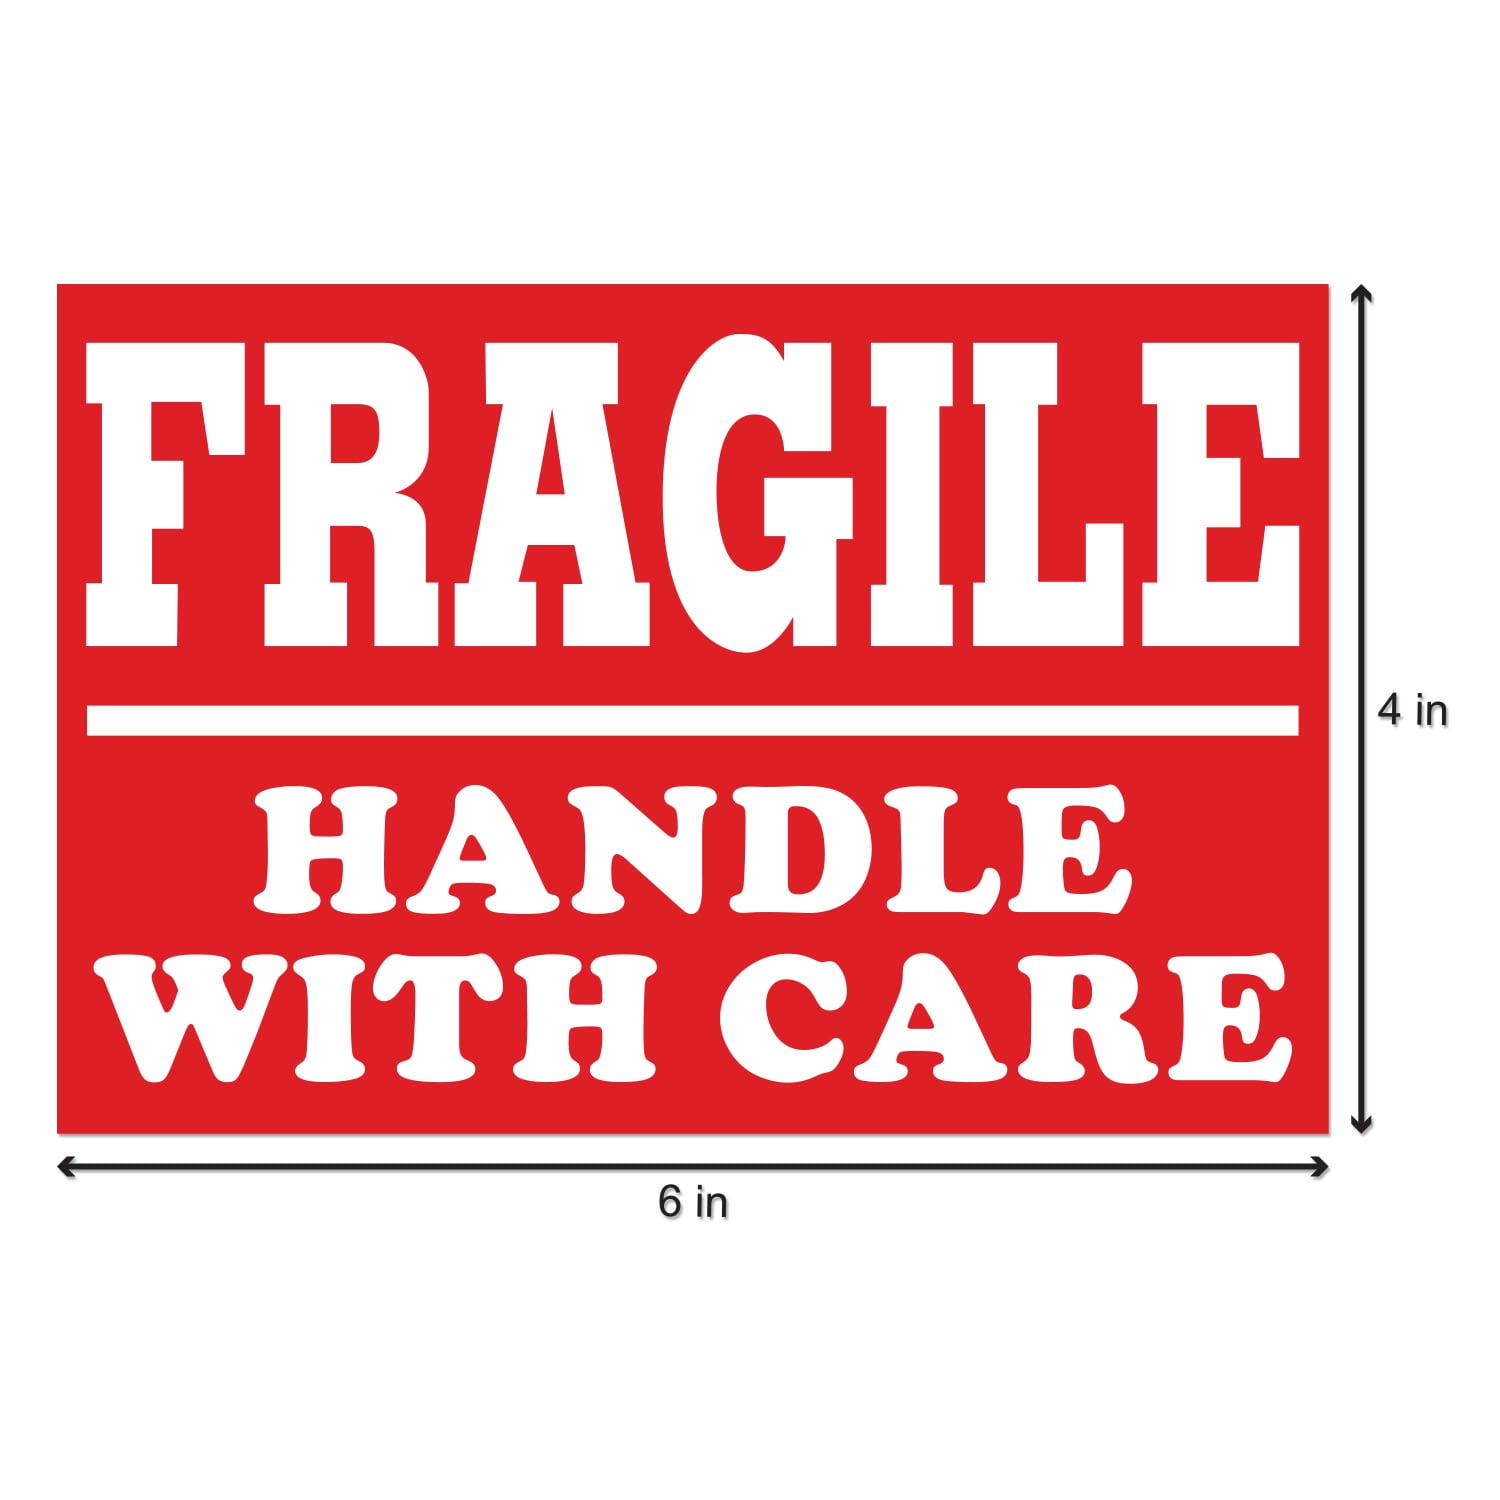 100 2x3 FRAGILE Stickers Handle with Care plus 15 PINK Thank You Stickers Ship